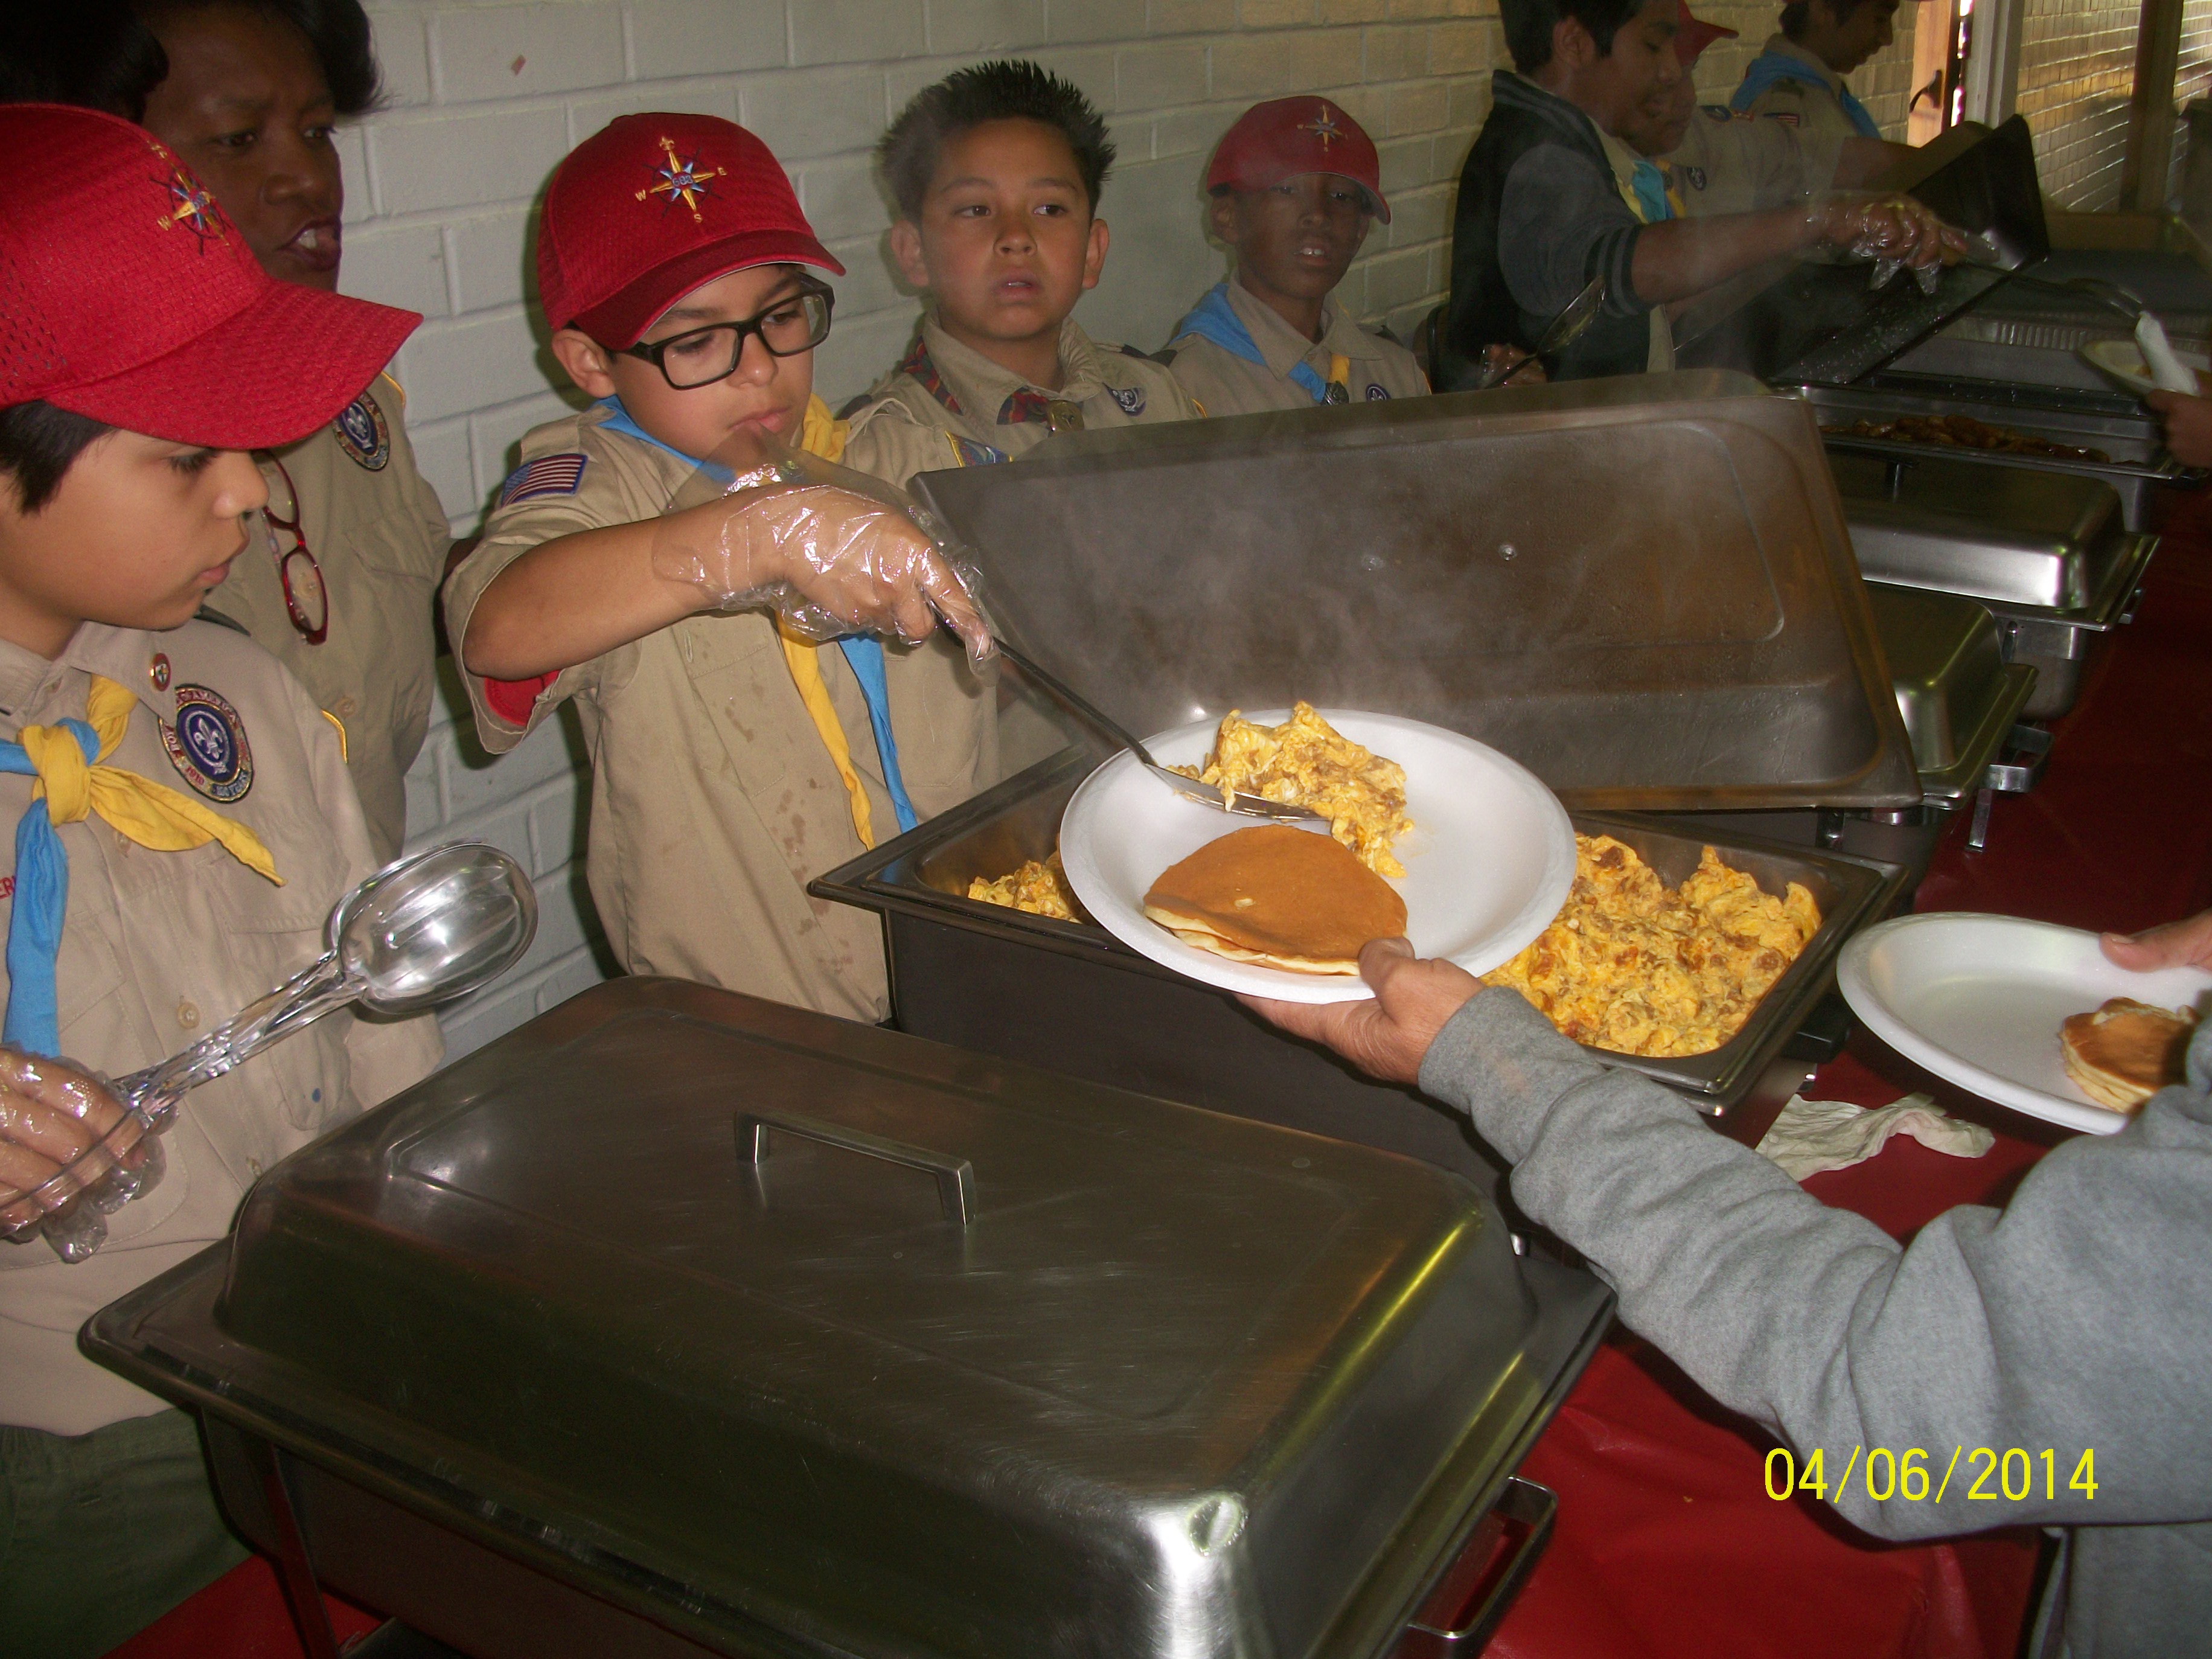 Newer Scouts serving the food